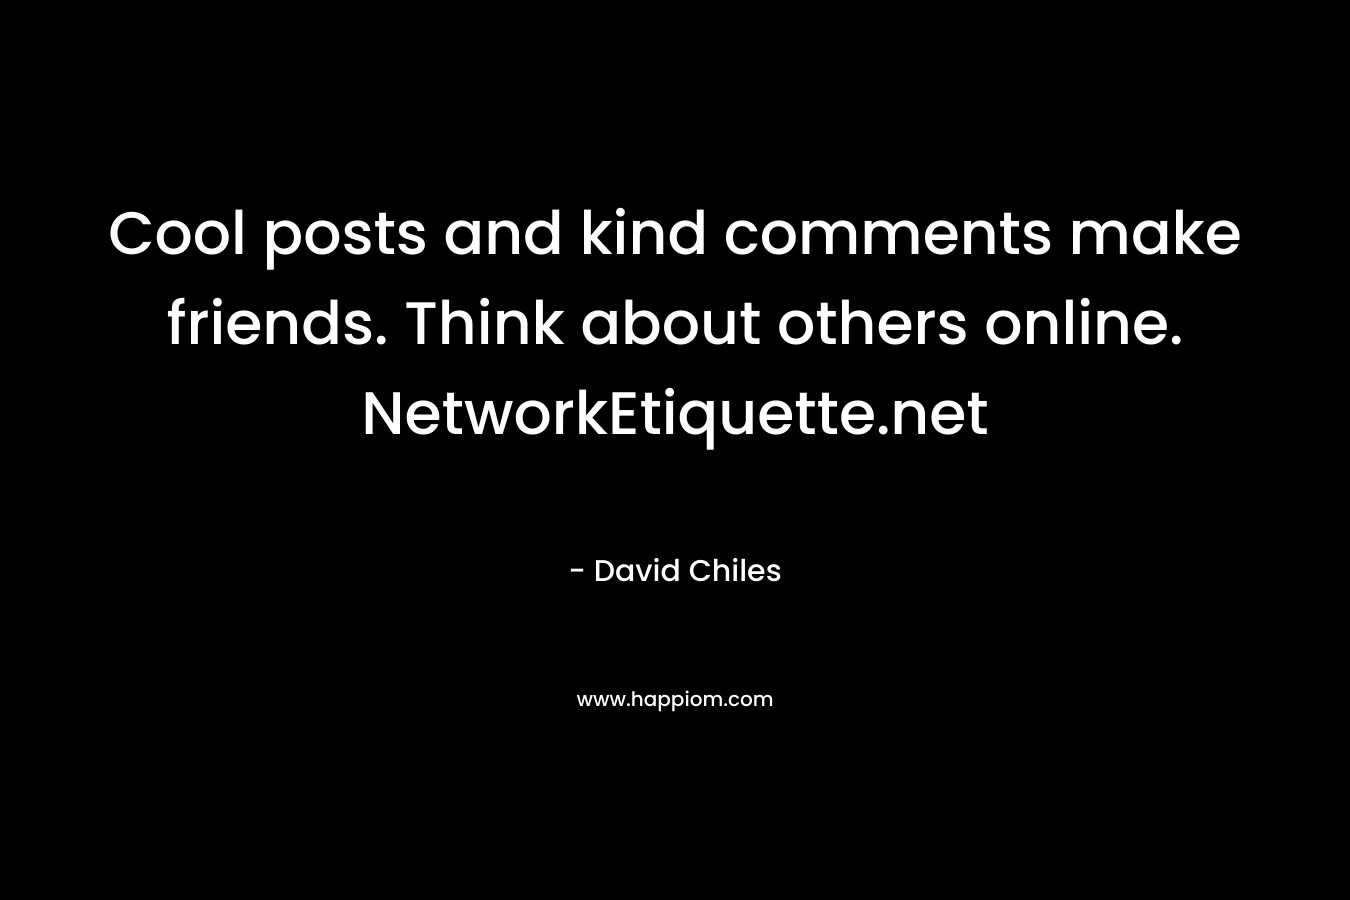 Cool posts and kind comments make friends. Think about others online. NetworkEtiquette.net